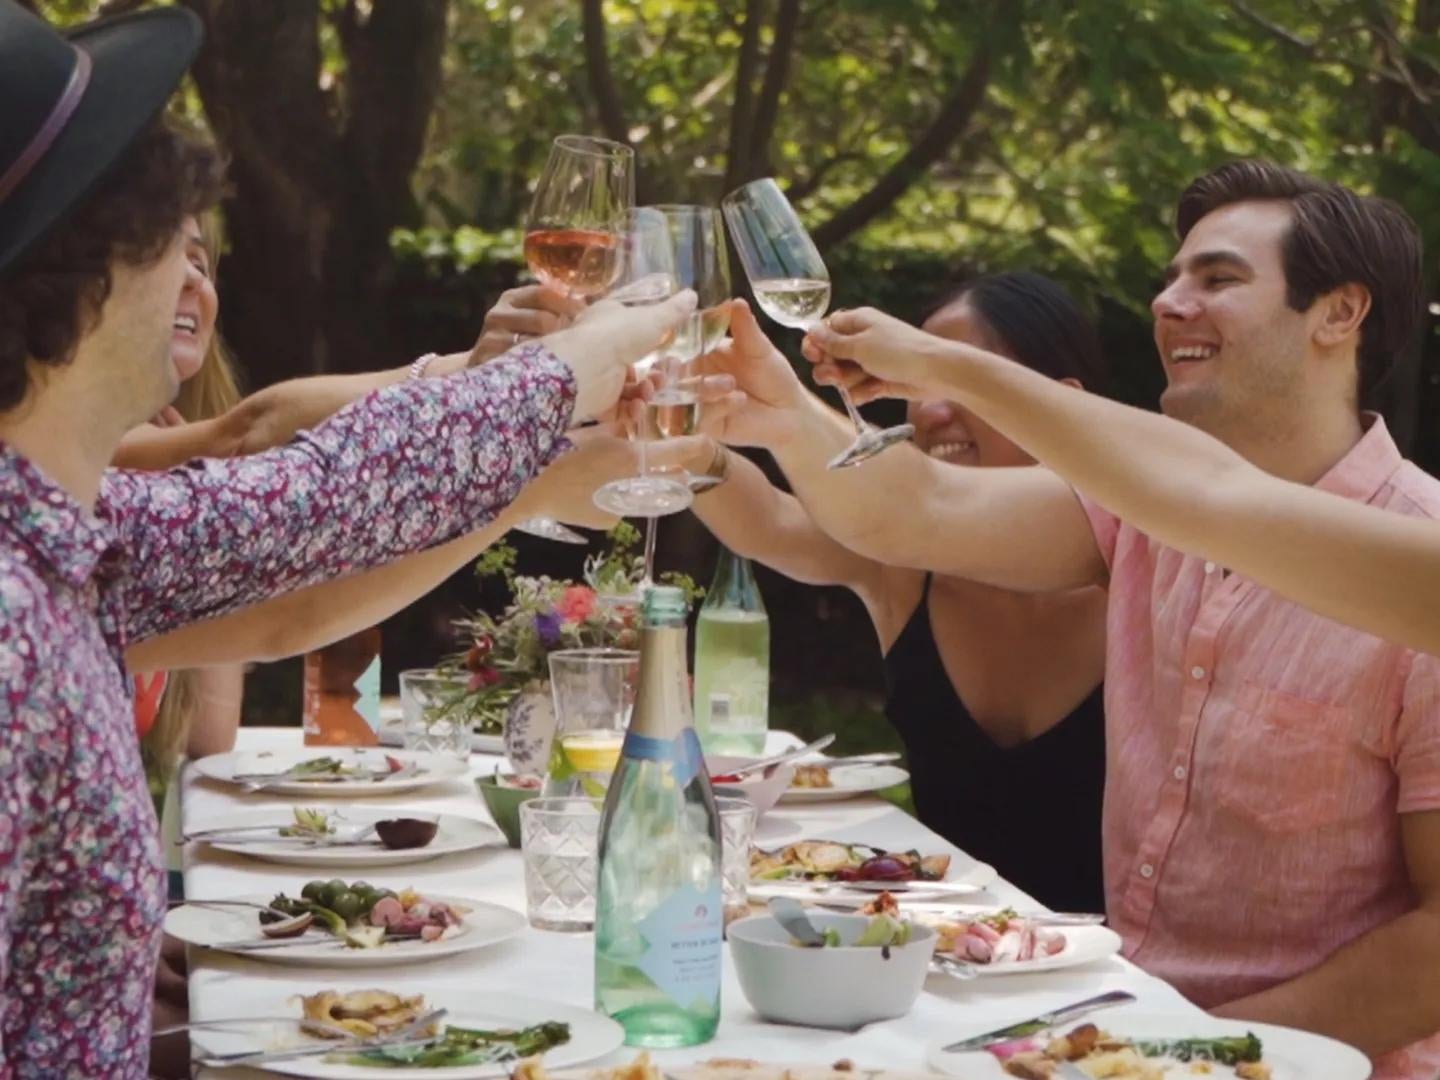 Friends celebrate a toast while having a meal seated at a table in a garden.